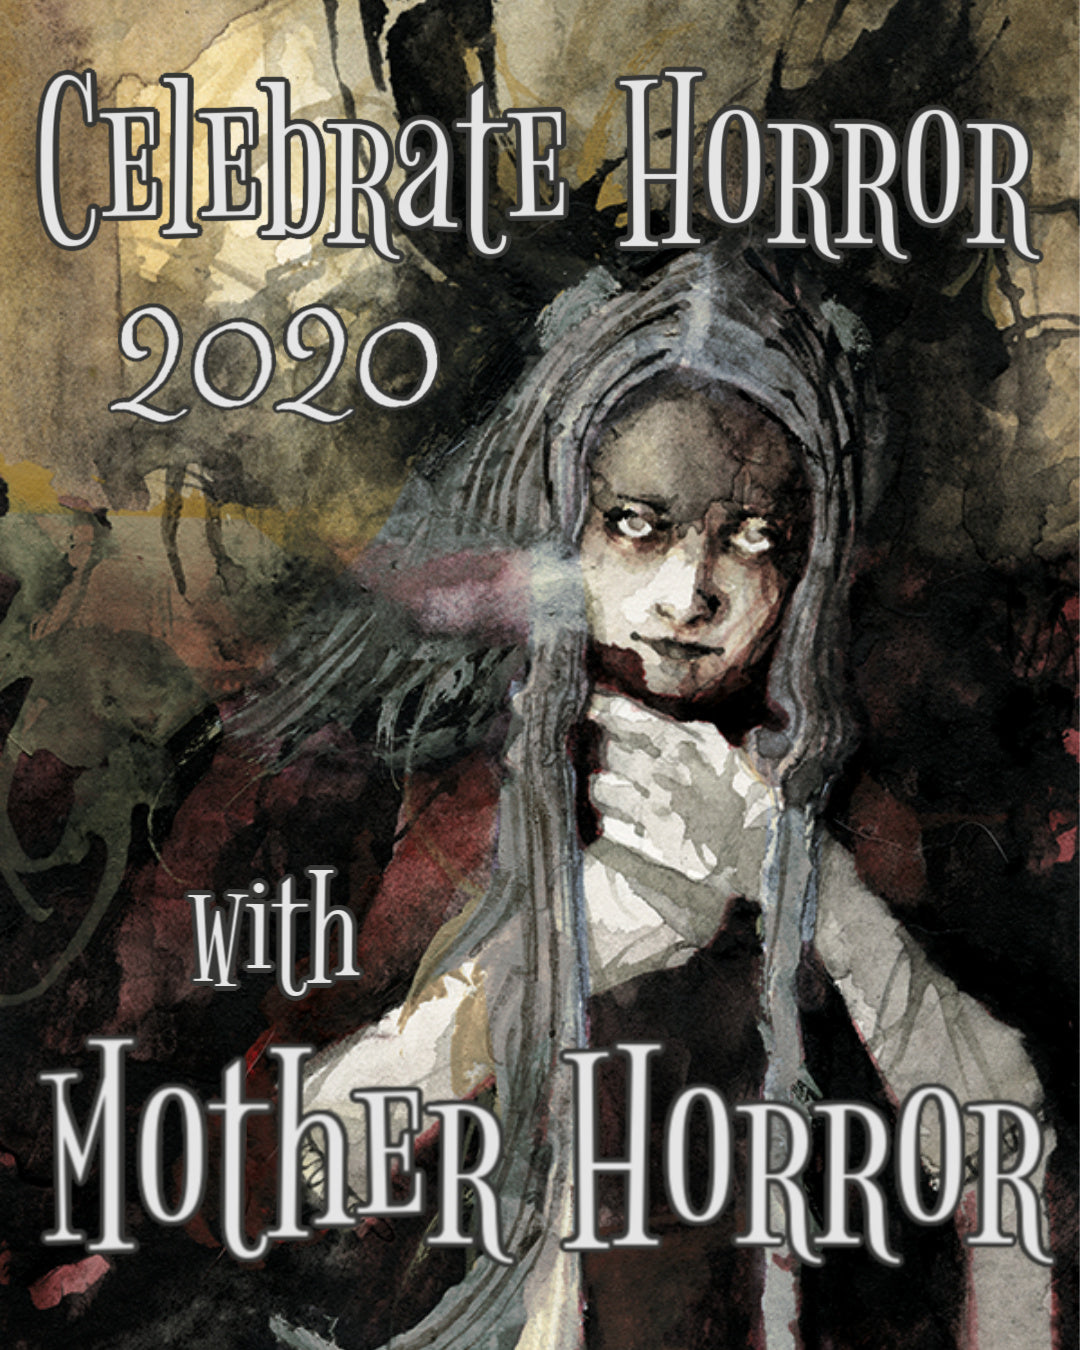 Celebrate Horror 2020 with Mother Horror